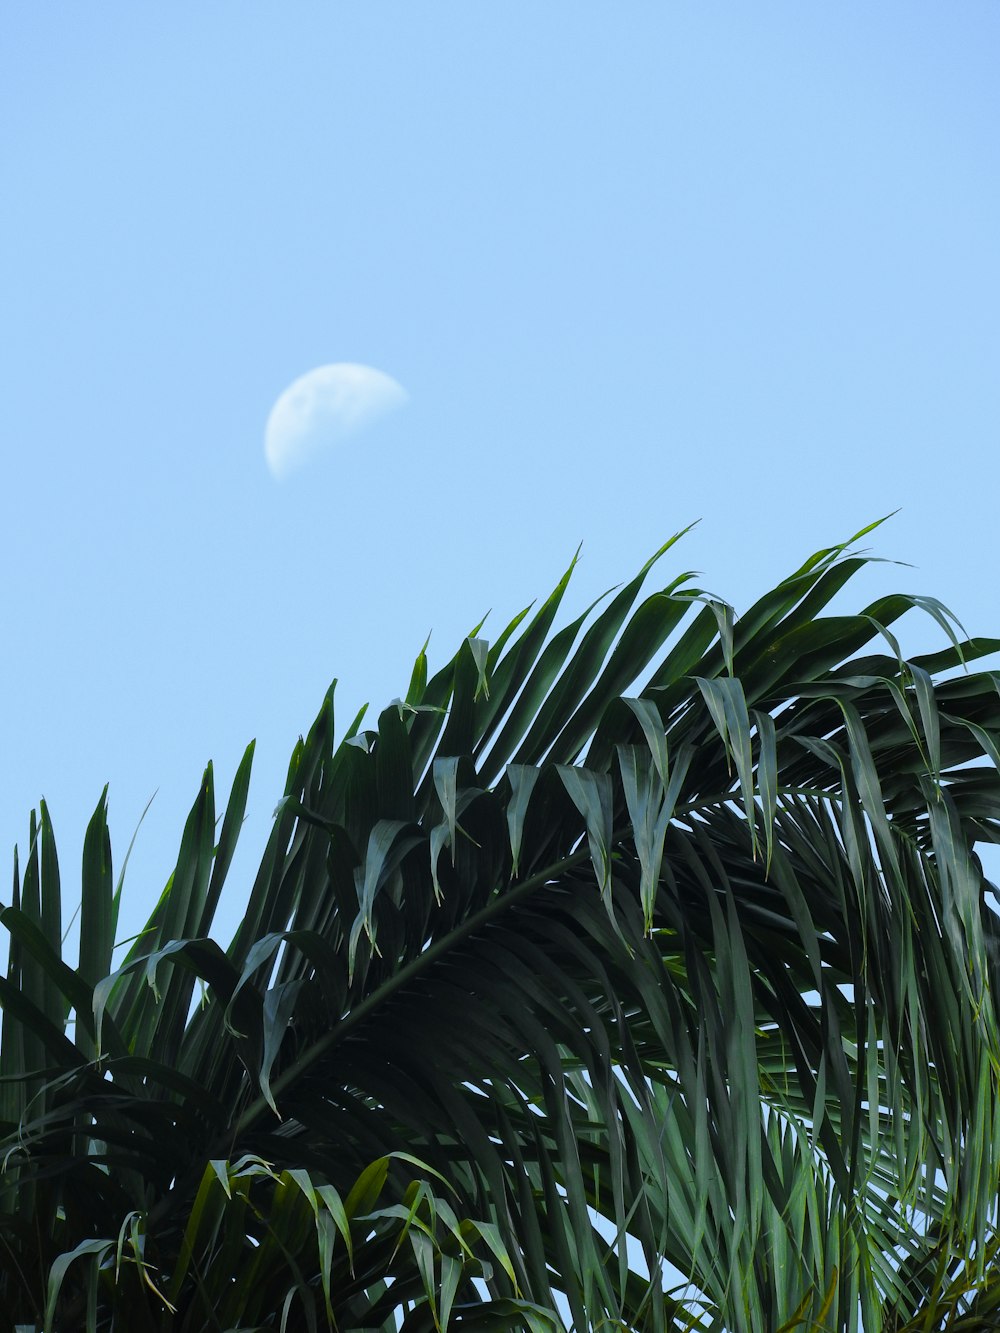 green palm trees and the moon